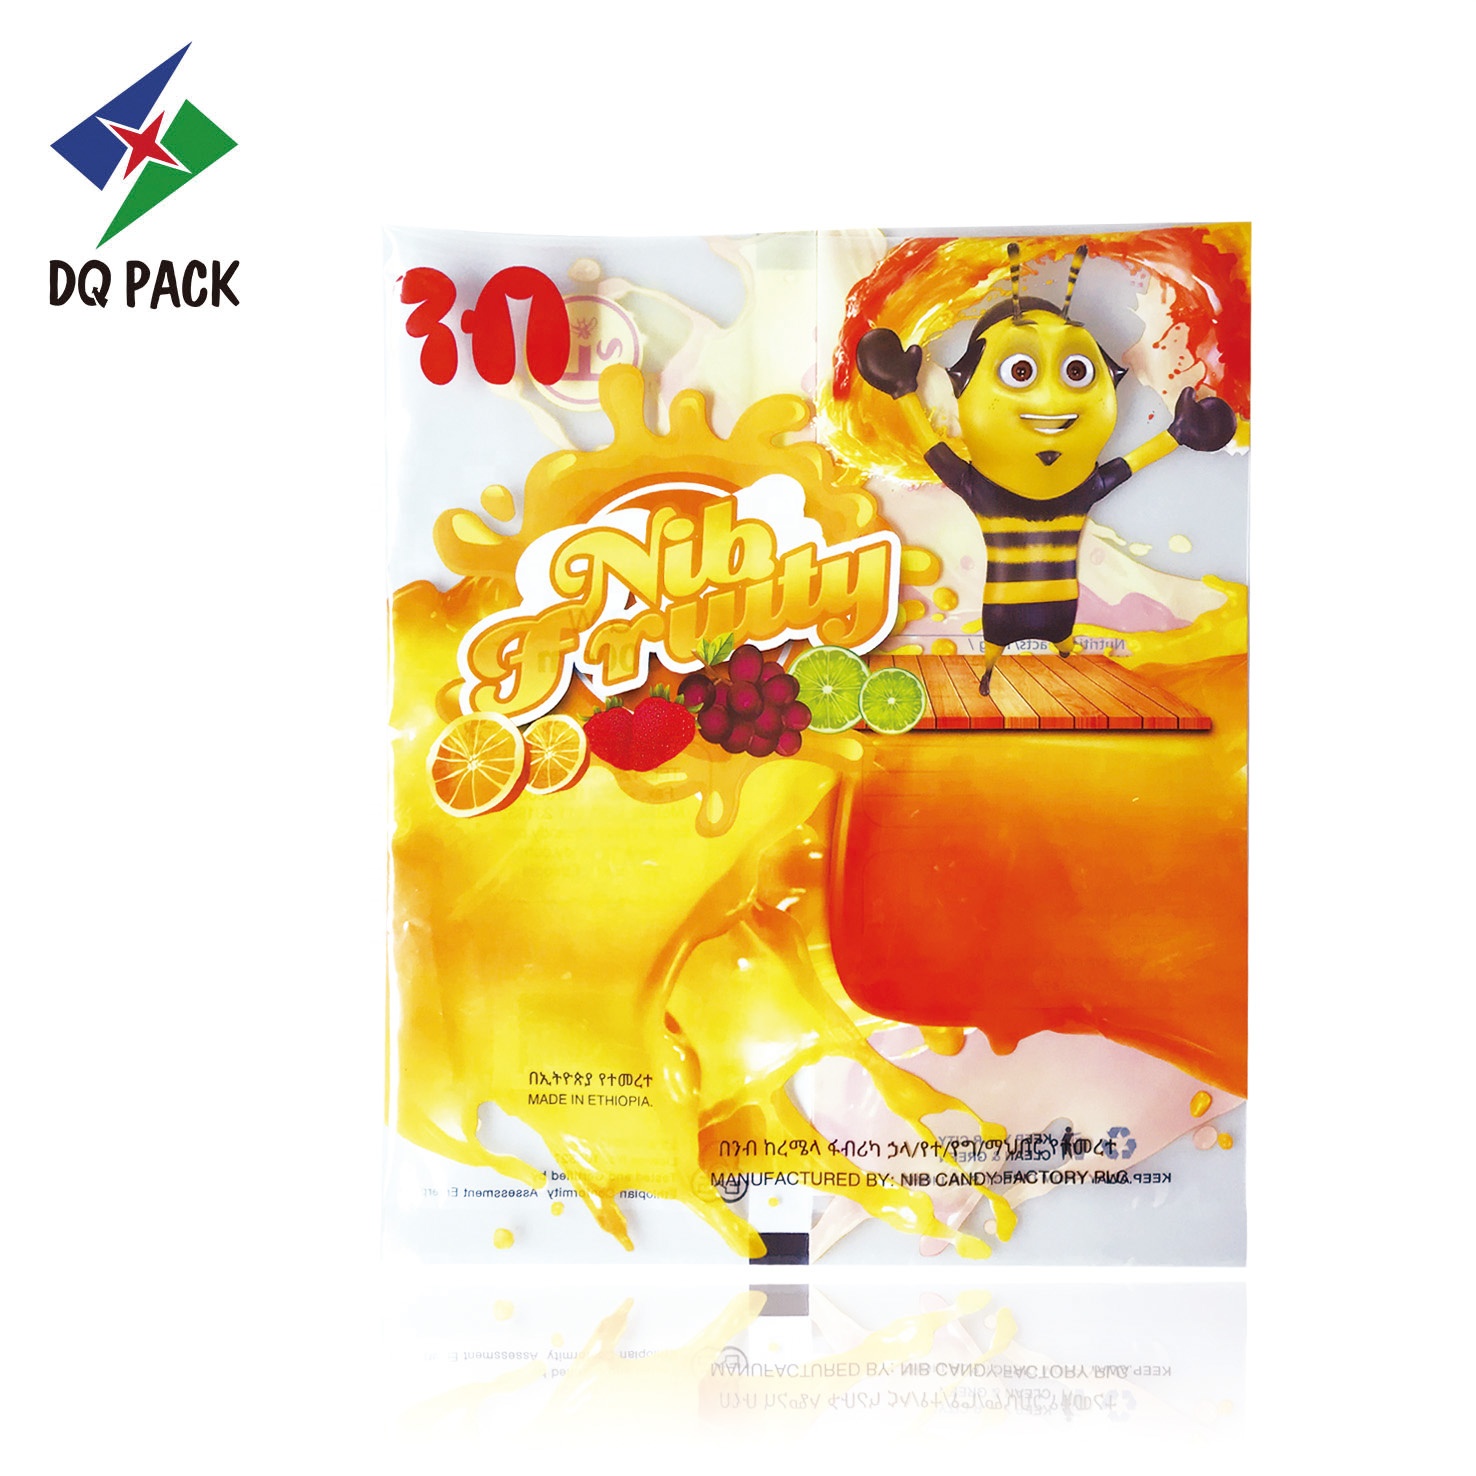 DQ PACK Custom Printed Mylar Bag  Plastic Packaging for Halvah Candy Packaging